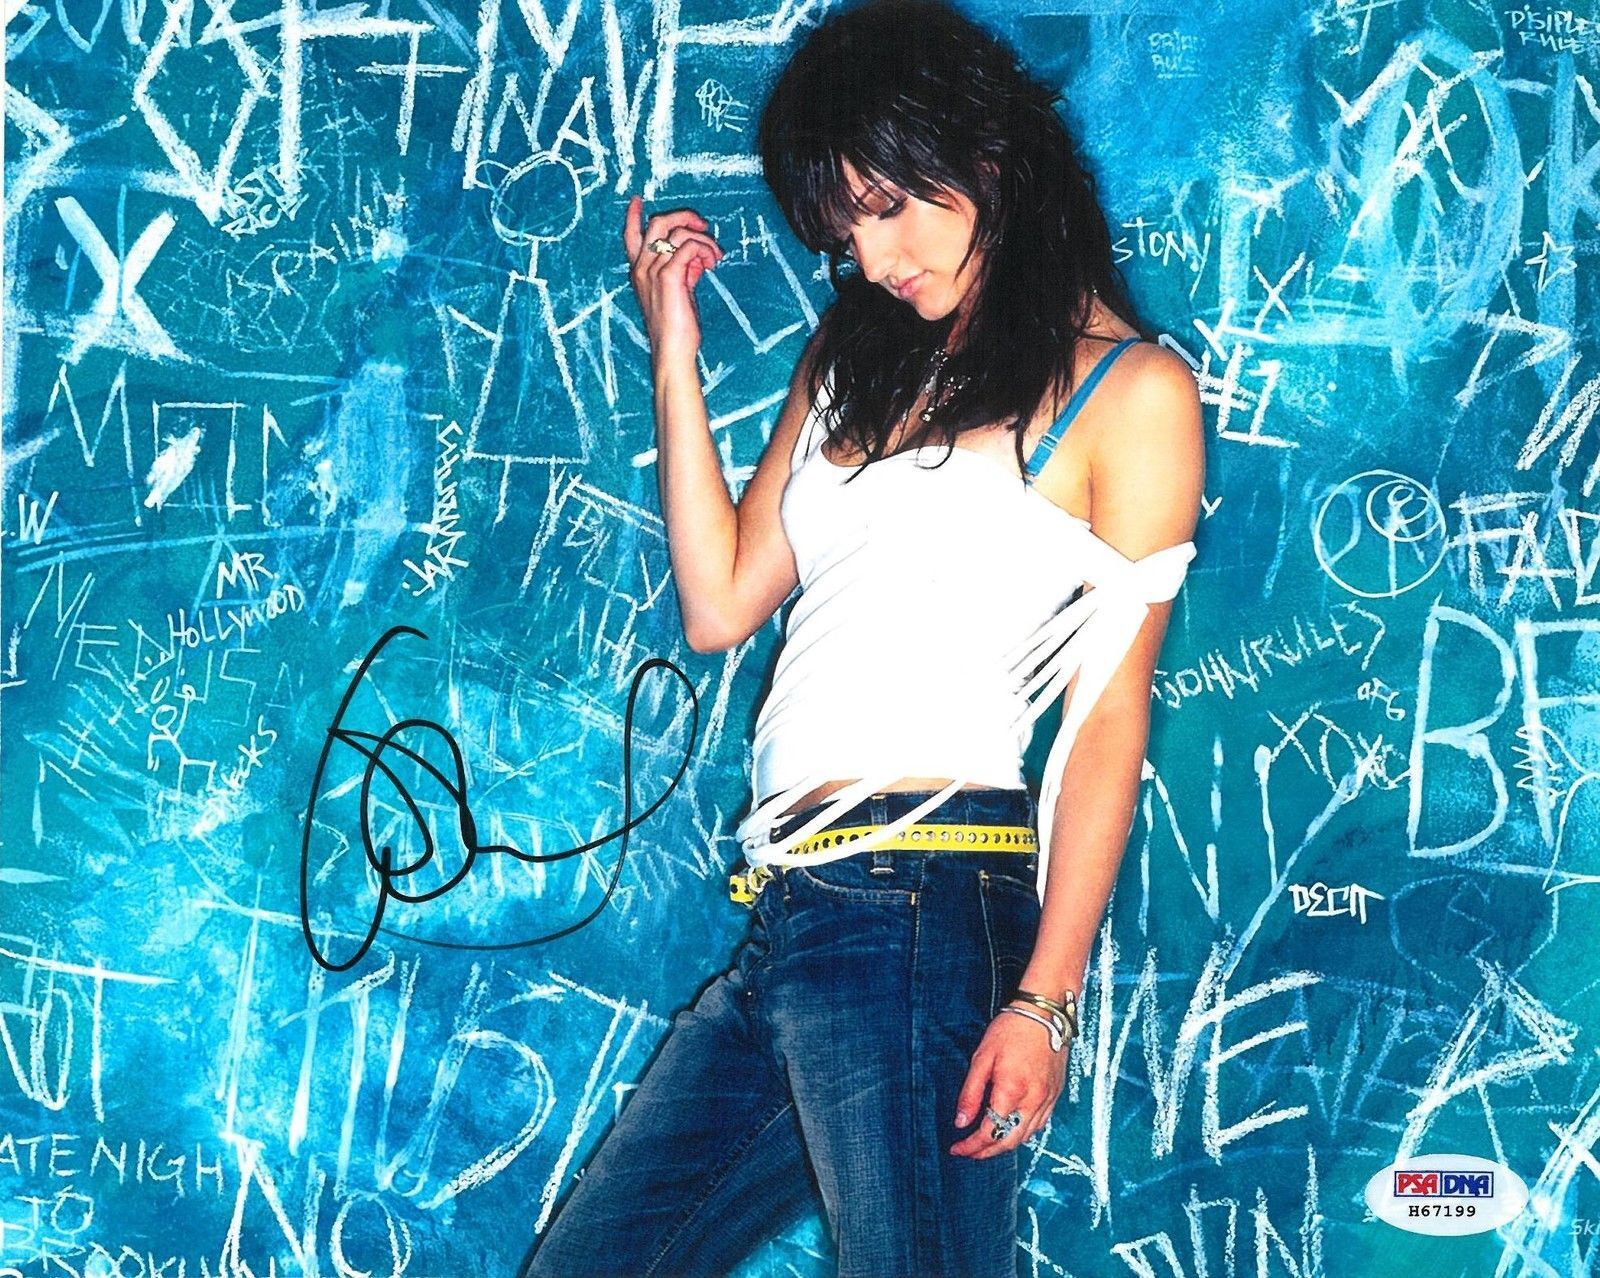 Ashlee Simpson Signed Authentic Autographed 8x10 Photo Poster painting PSA/DNA #H67199